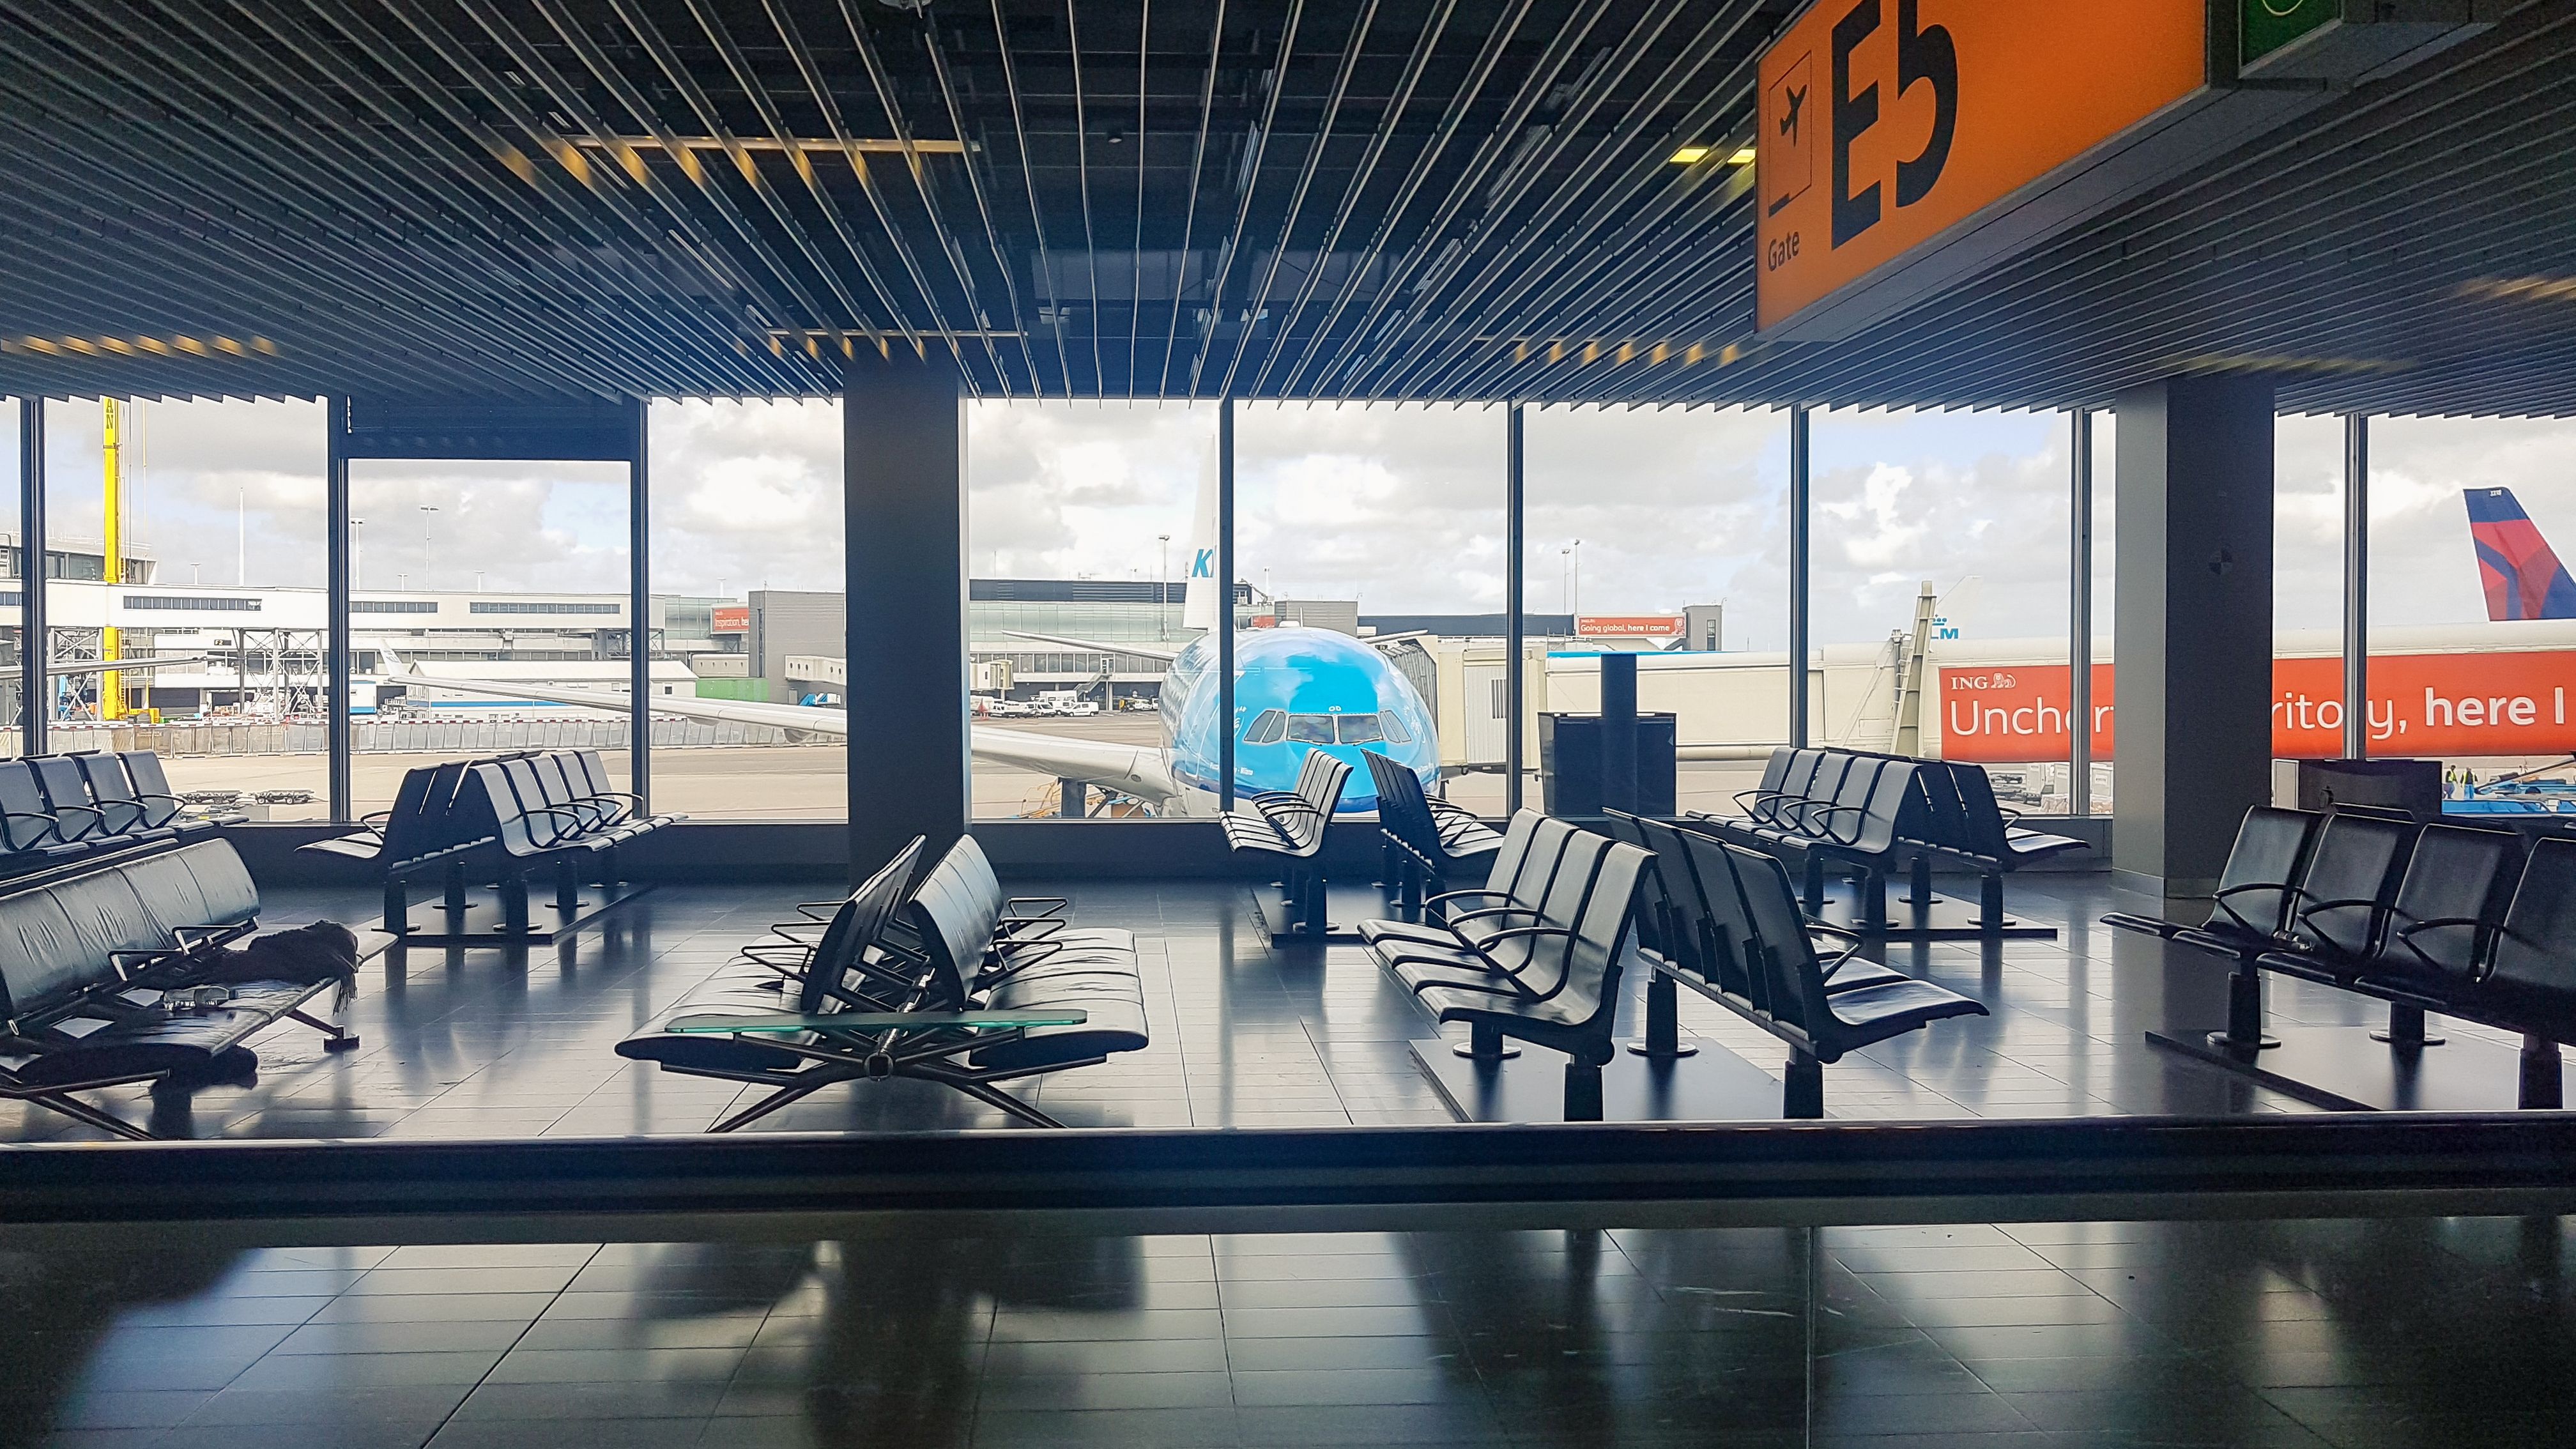 A departure lounge in Amsterdam, with a KLM aircraft parked at the gate.